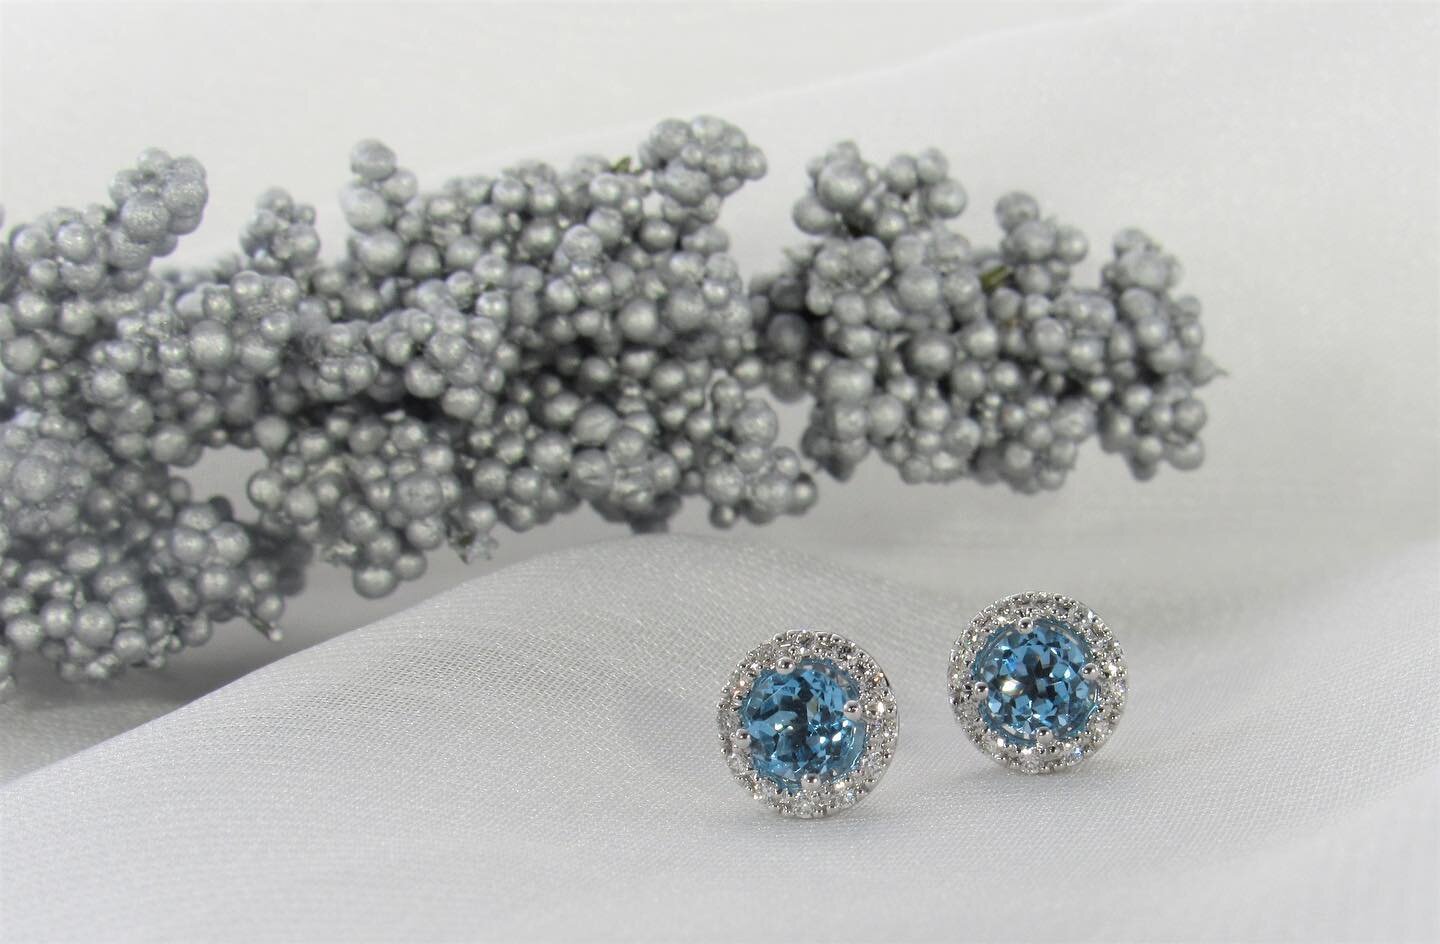 Icy blue topaz and diamond earrings top our holiday gift list this year!! 💎🧊💎 #thejewelersbenchhershey #hershey #diamond #bluetopaz #earrings #whitegold #icy #gift #giftideas #stockingstuffers #jewelery #finejewelry #christmas2021